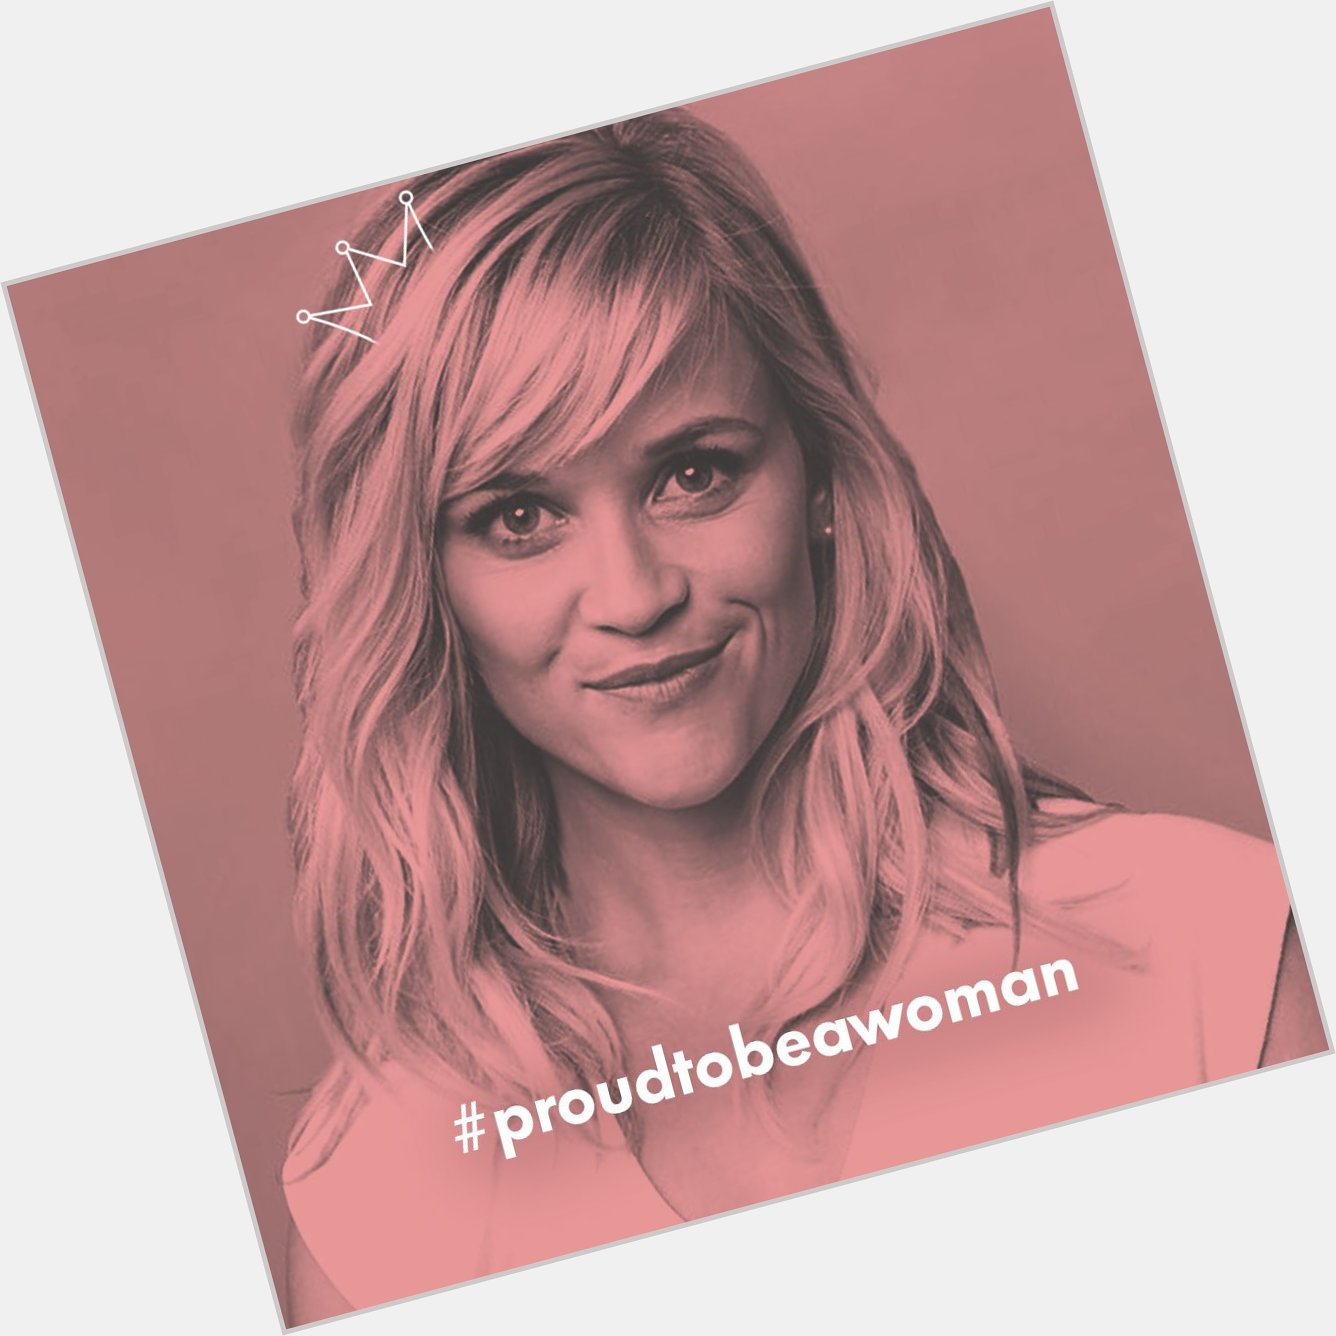  Today is a Power Woman B-Day! <3
Happy Birthday, Reese Witherspoon!  